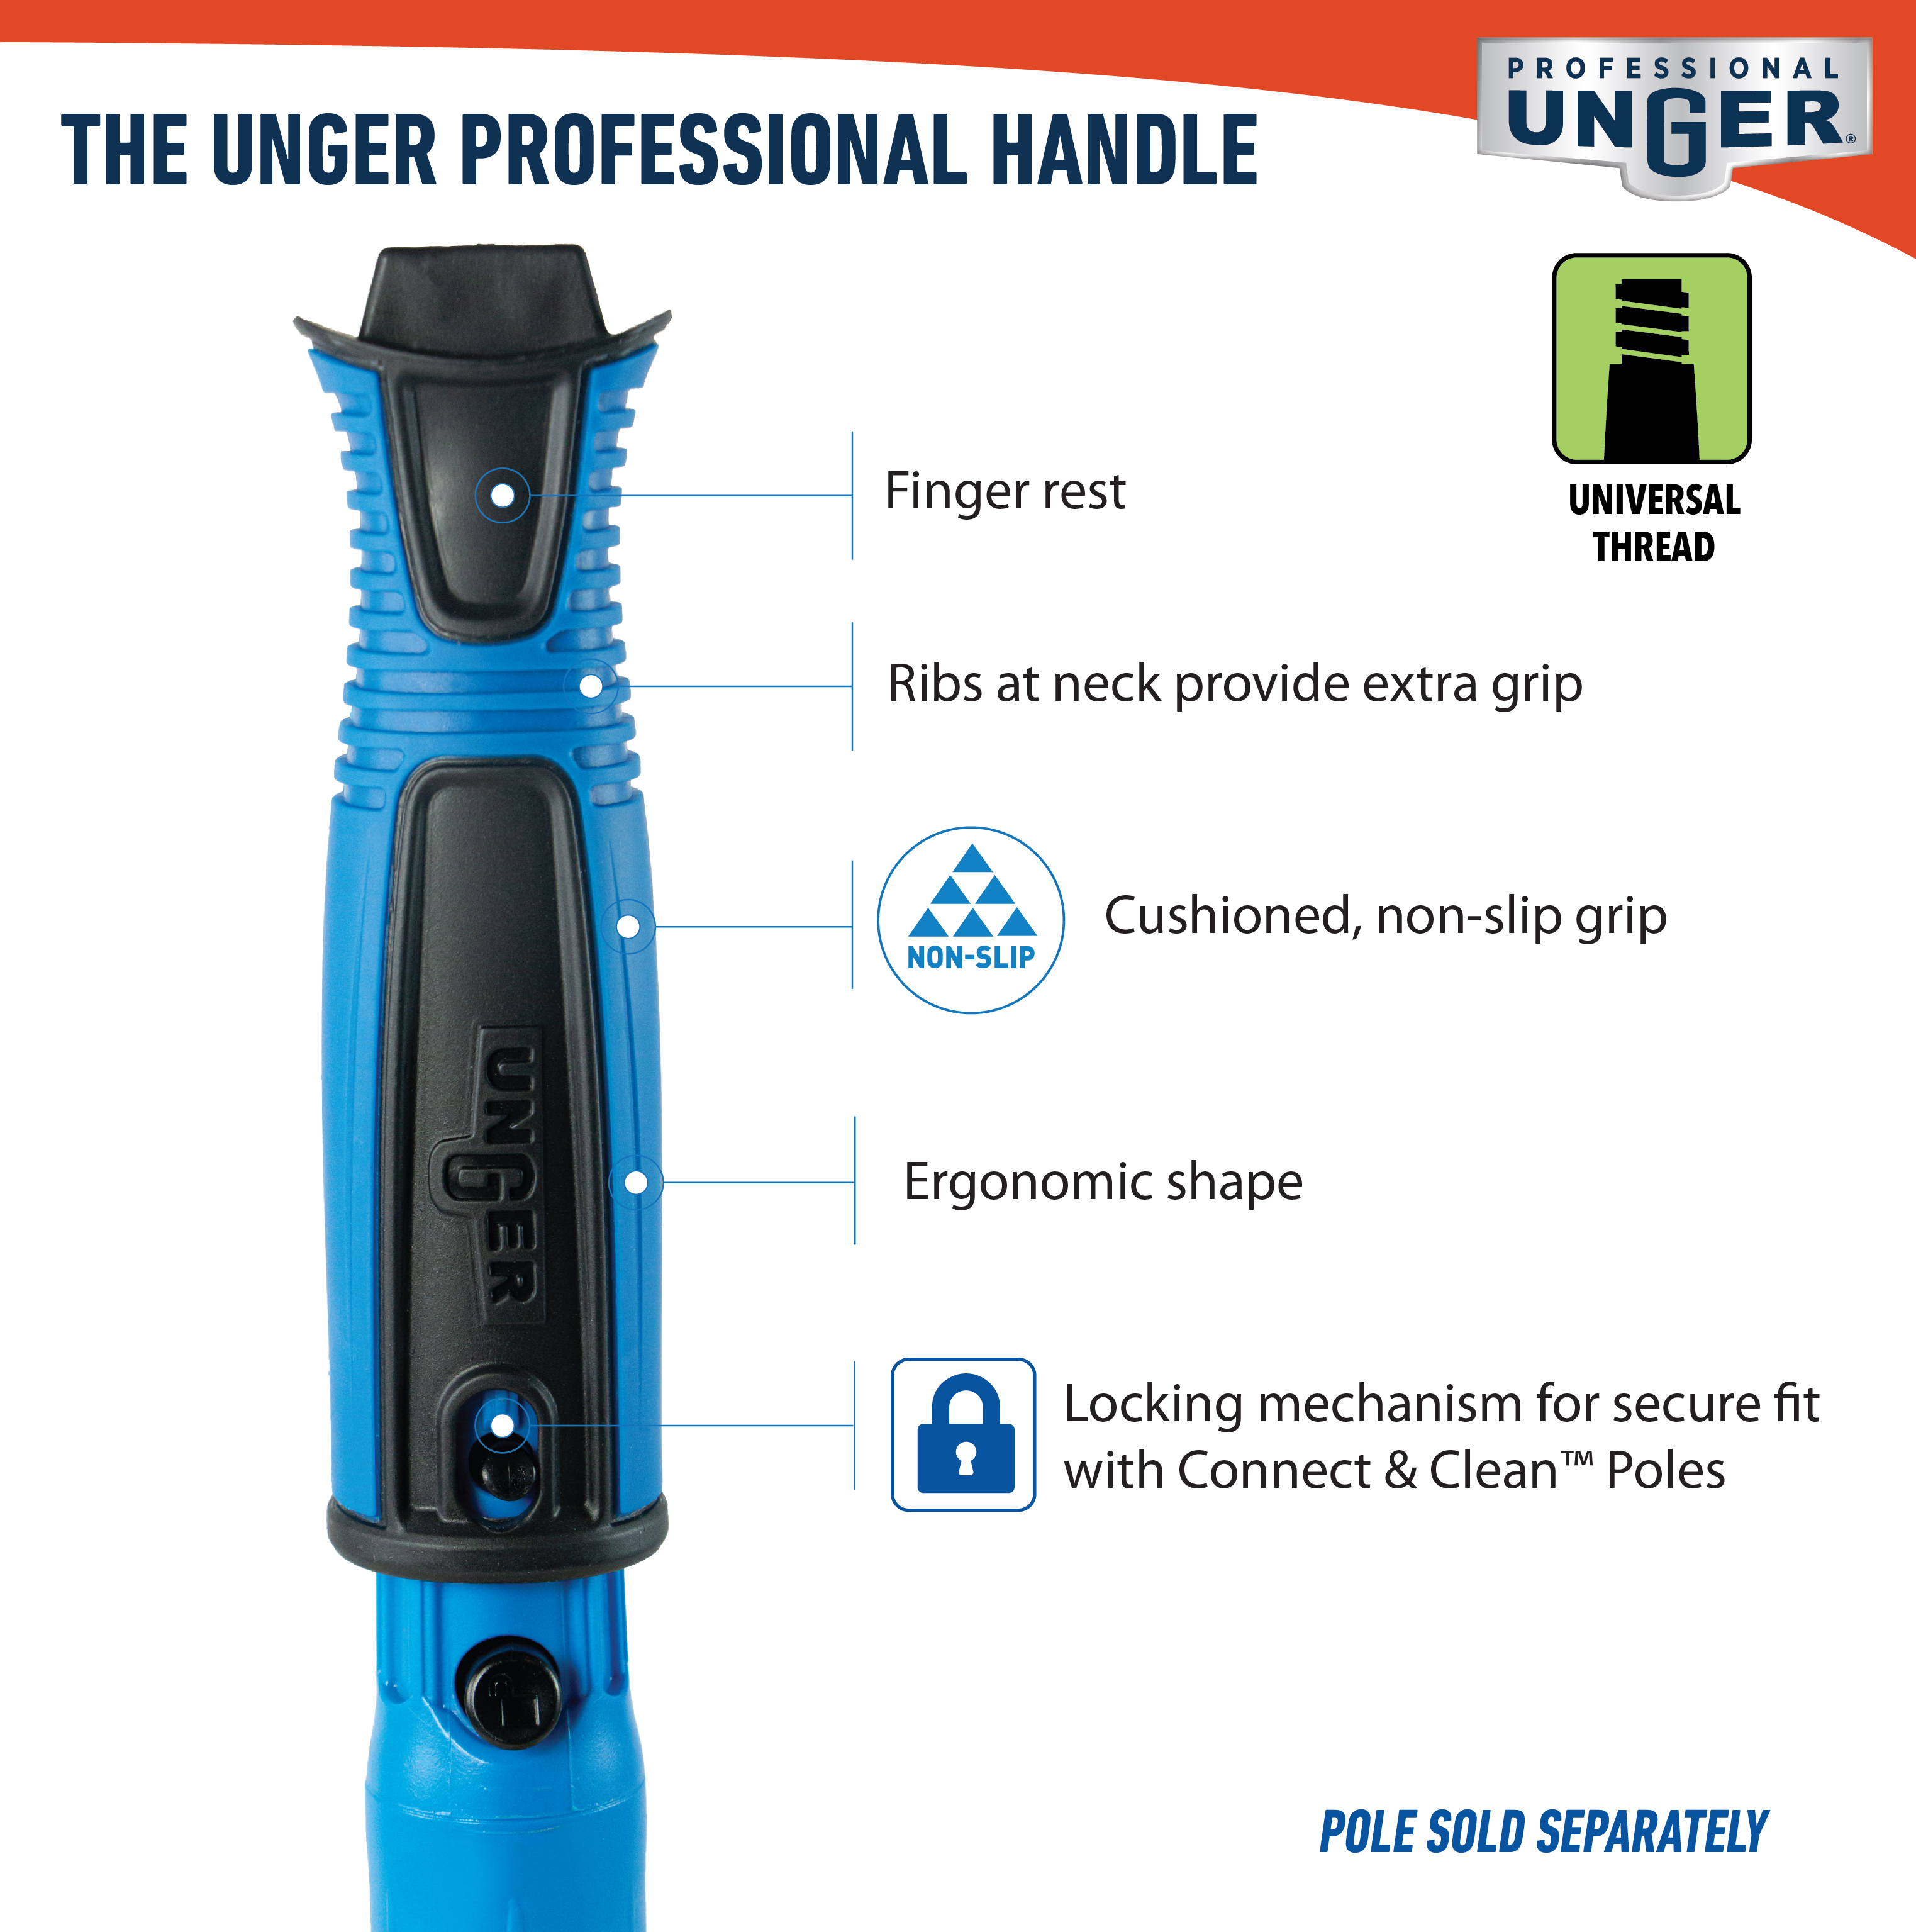 981020_UI_Unger Pro_16 inch Performance Grip Squeegee_Infographics 2